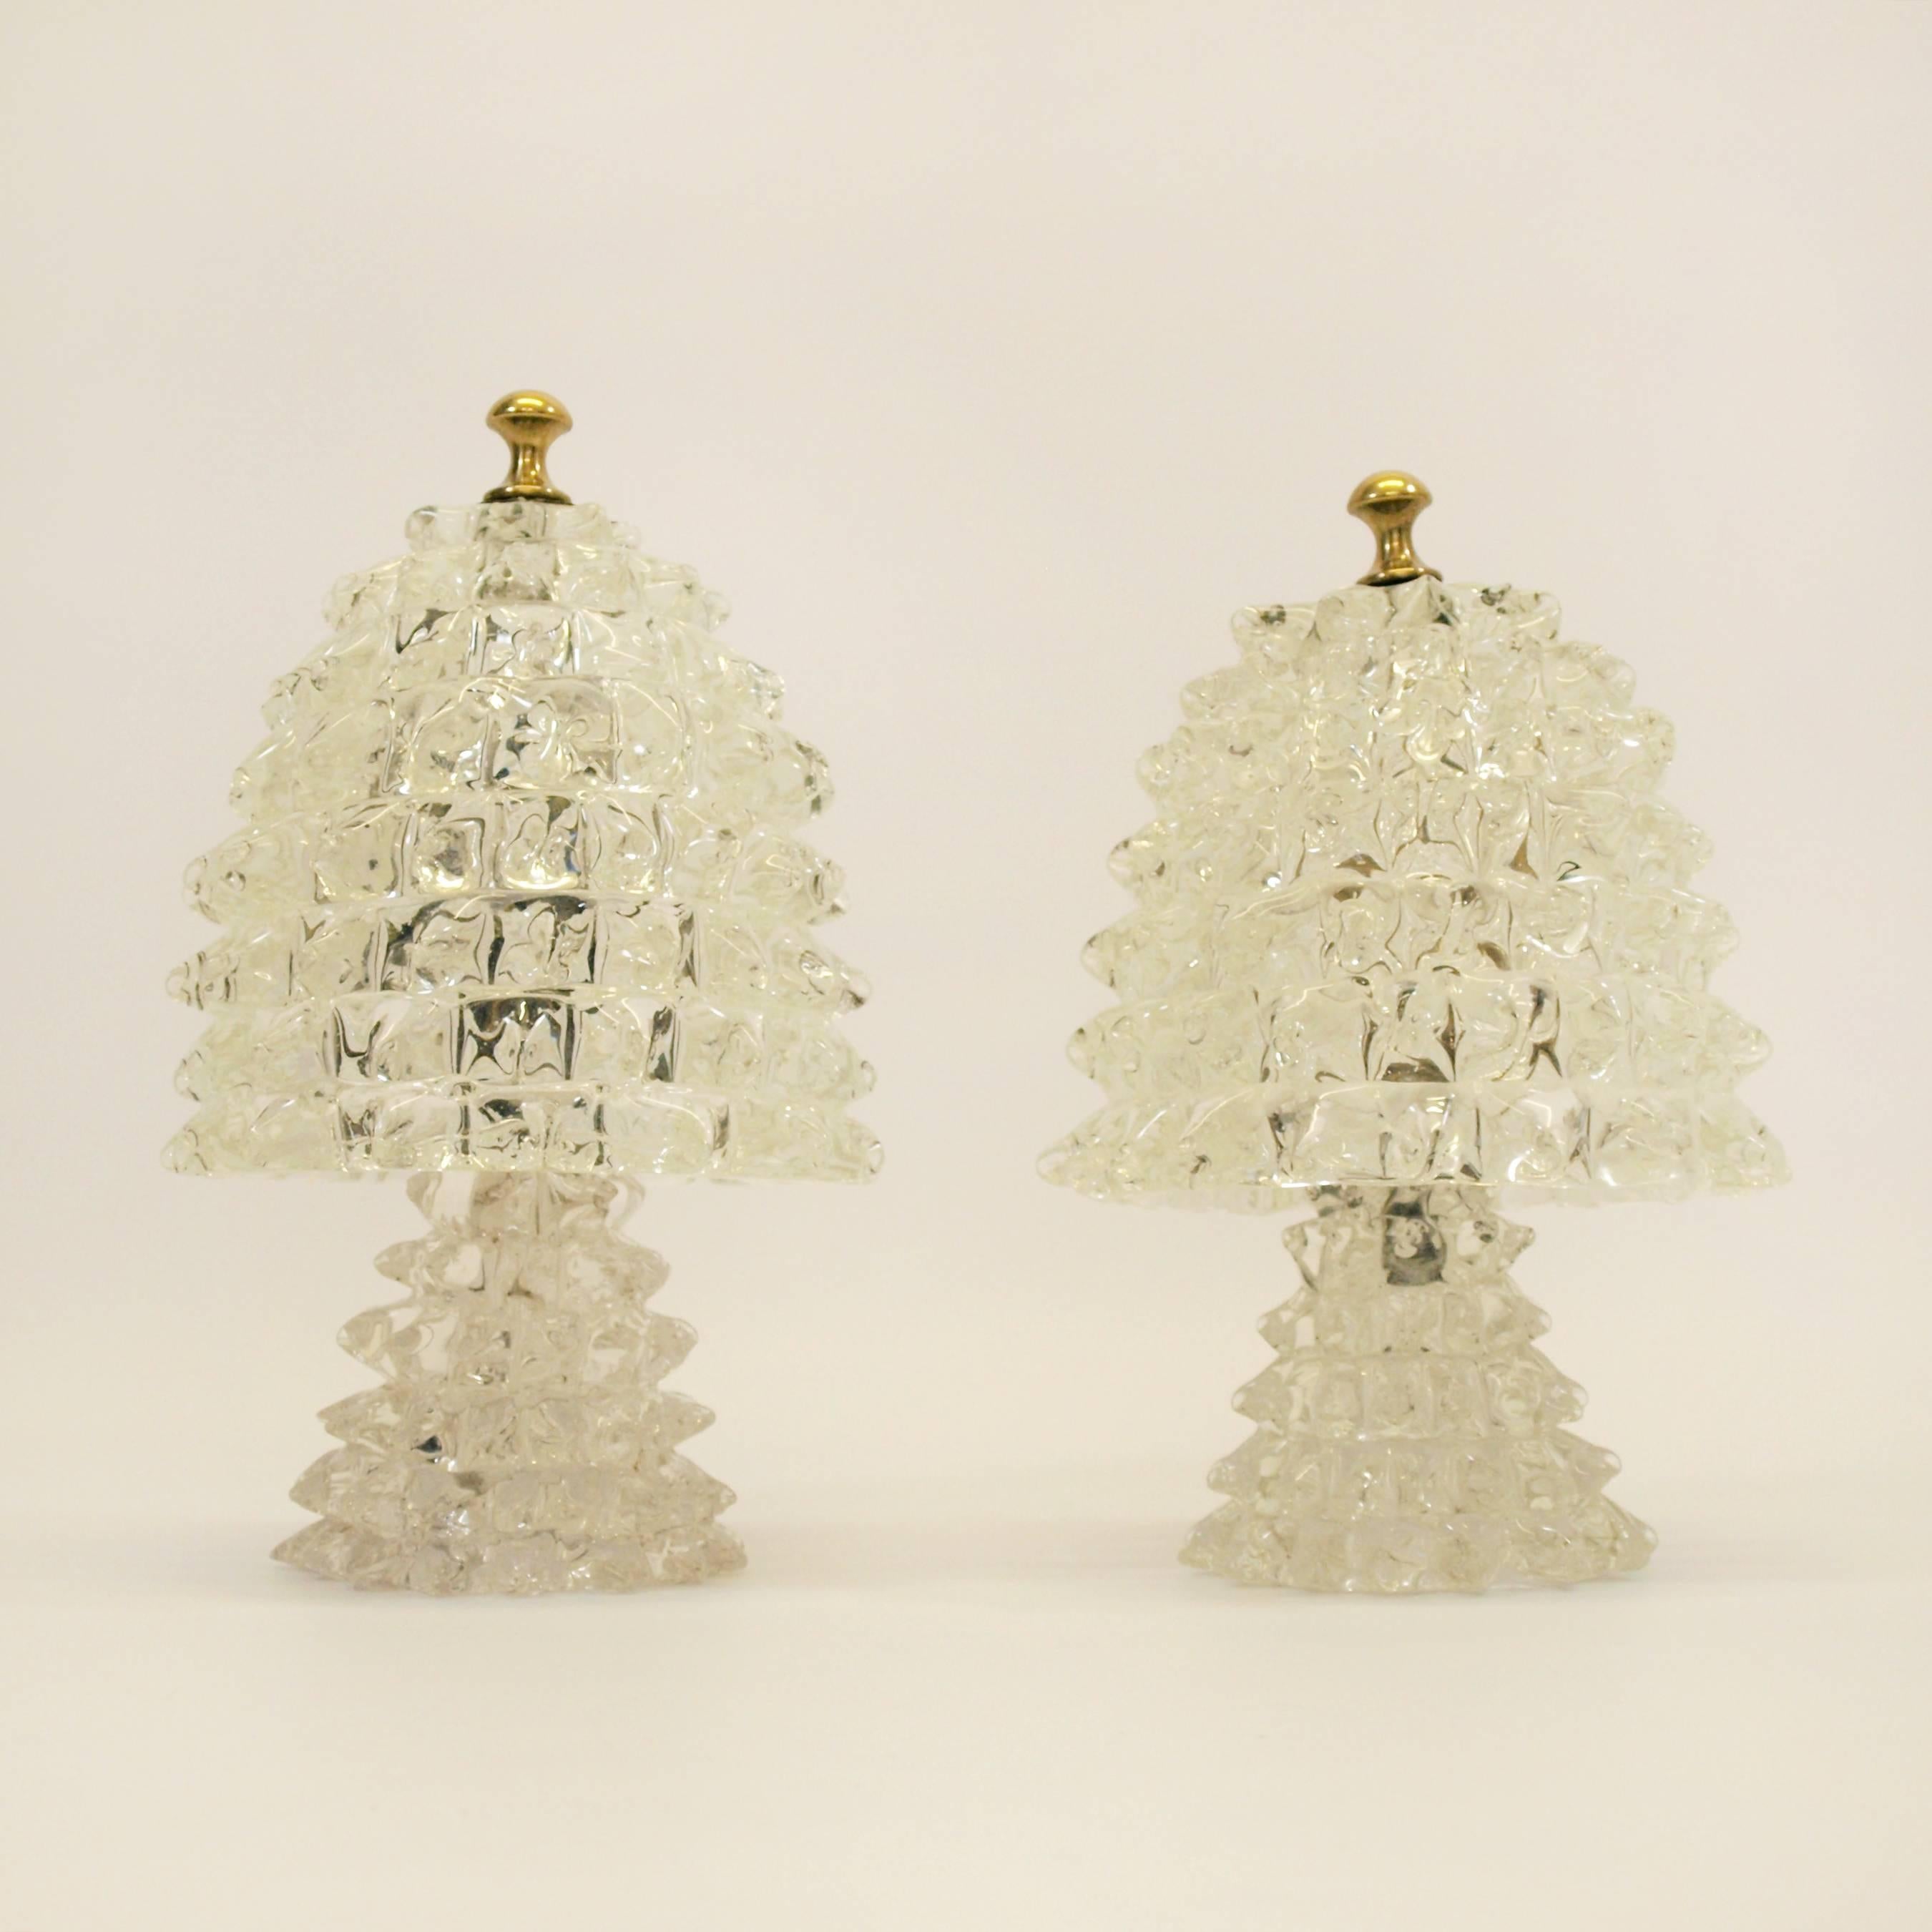 A very elegant pair of table lamps designed by Barovier and Toso from the 1940s in rostrato Murano glass.